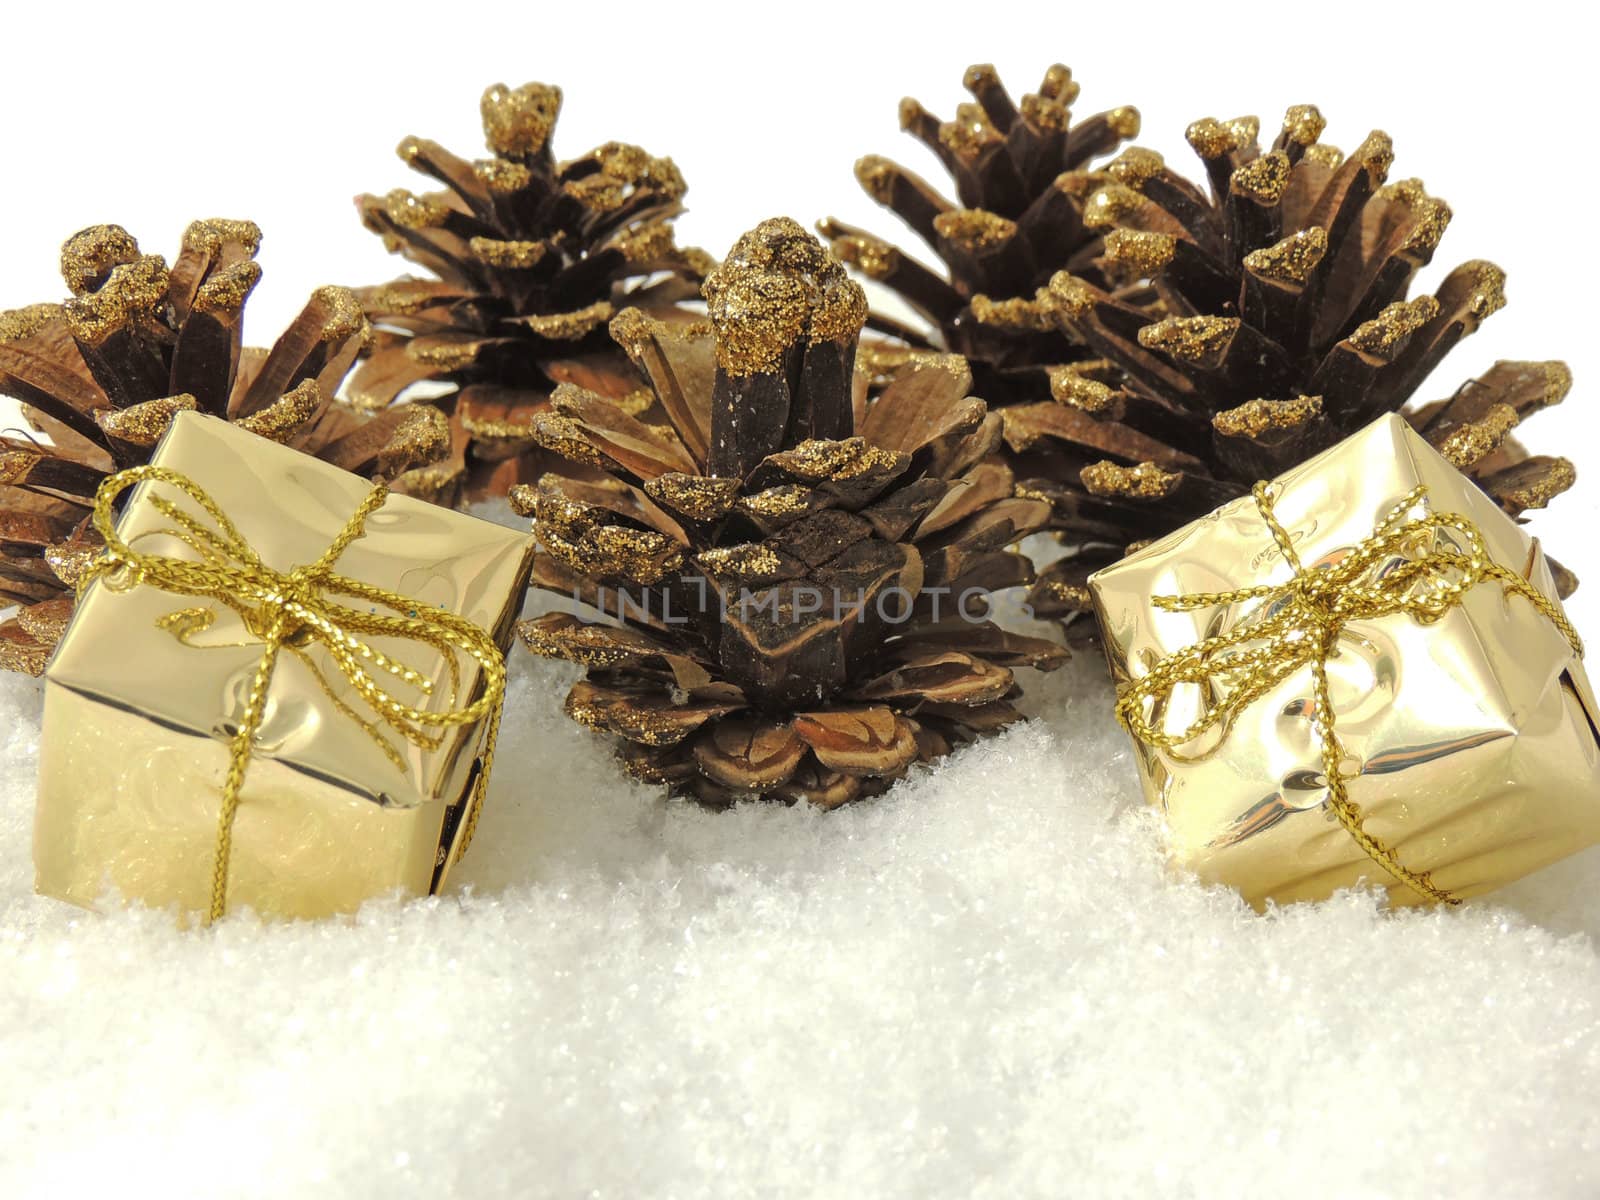 pine cones and gifts decoration by mereutaandrei